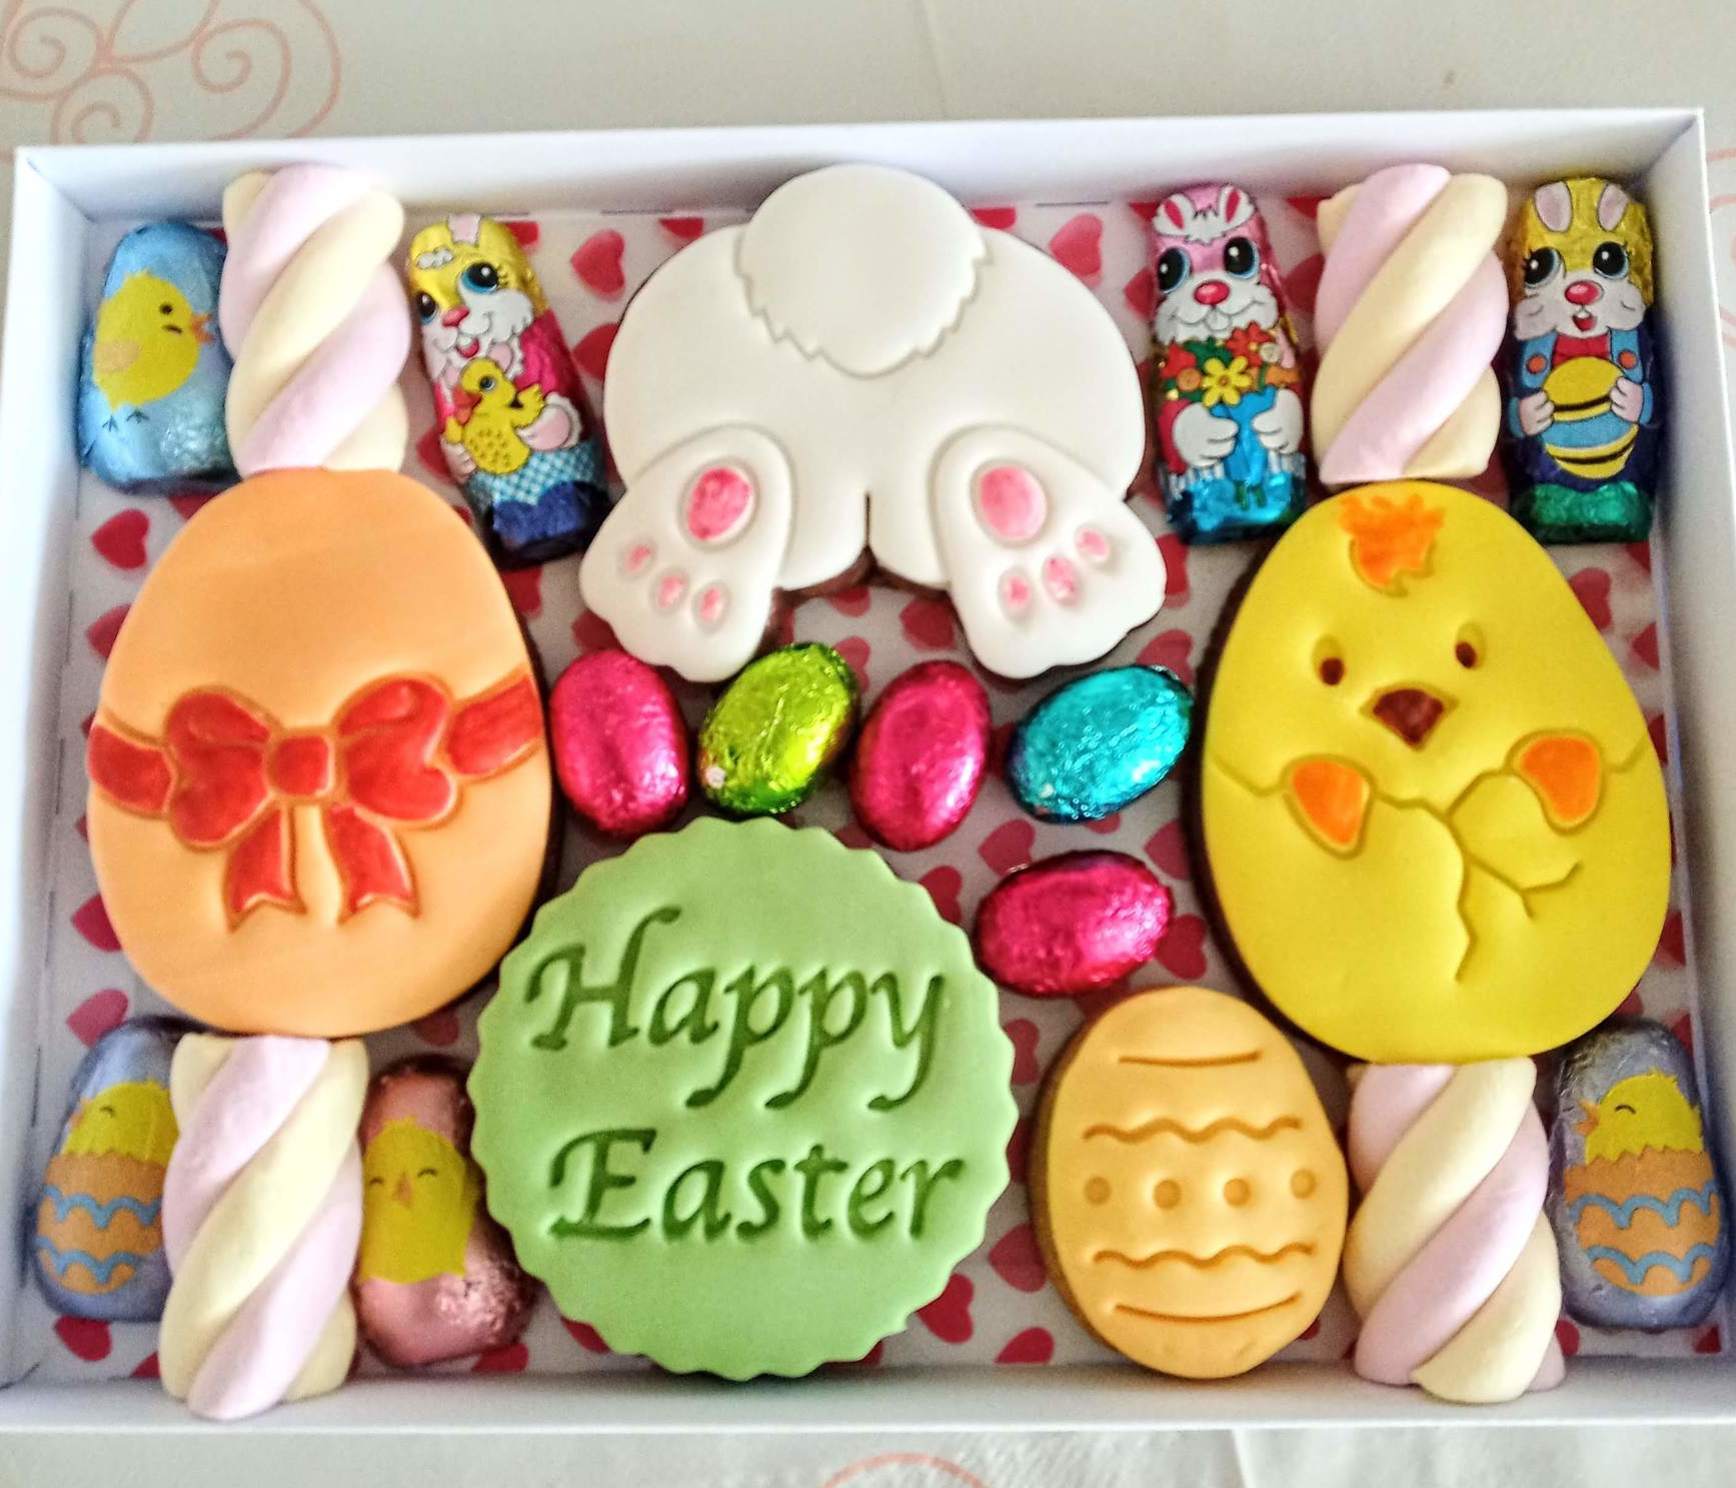 Easter cookie variety box - 1